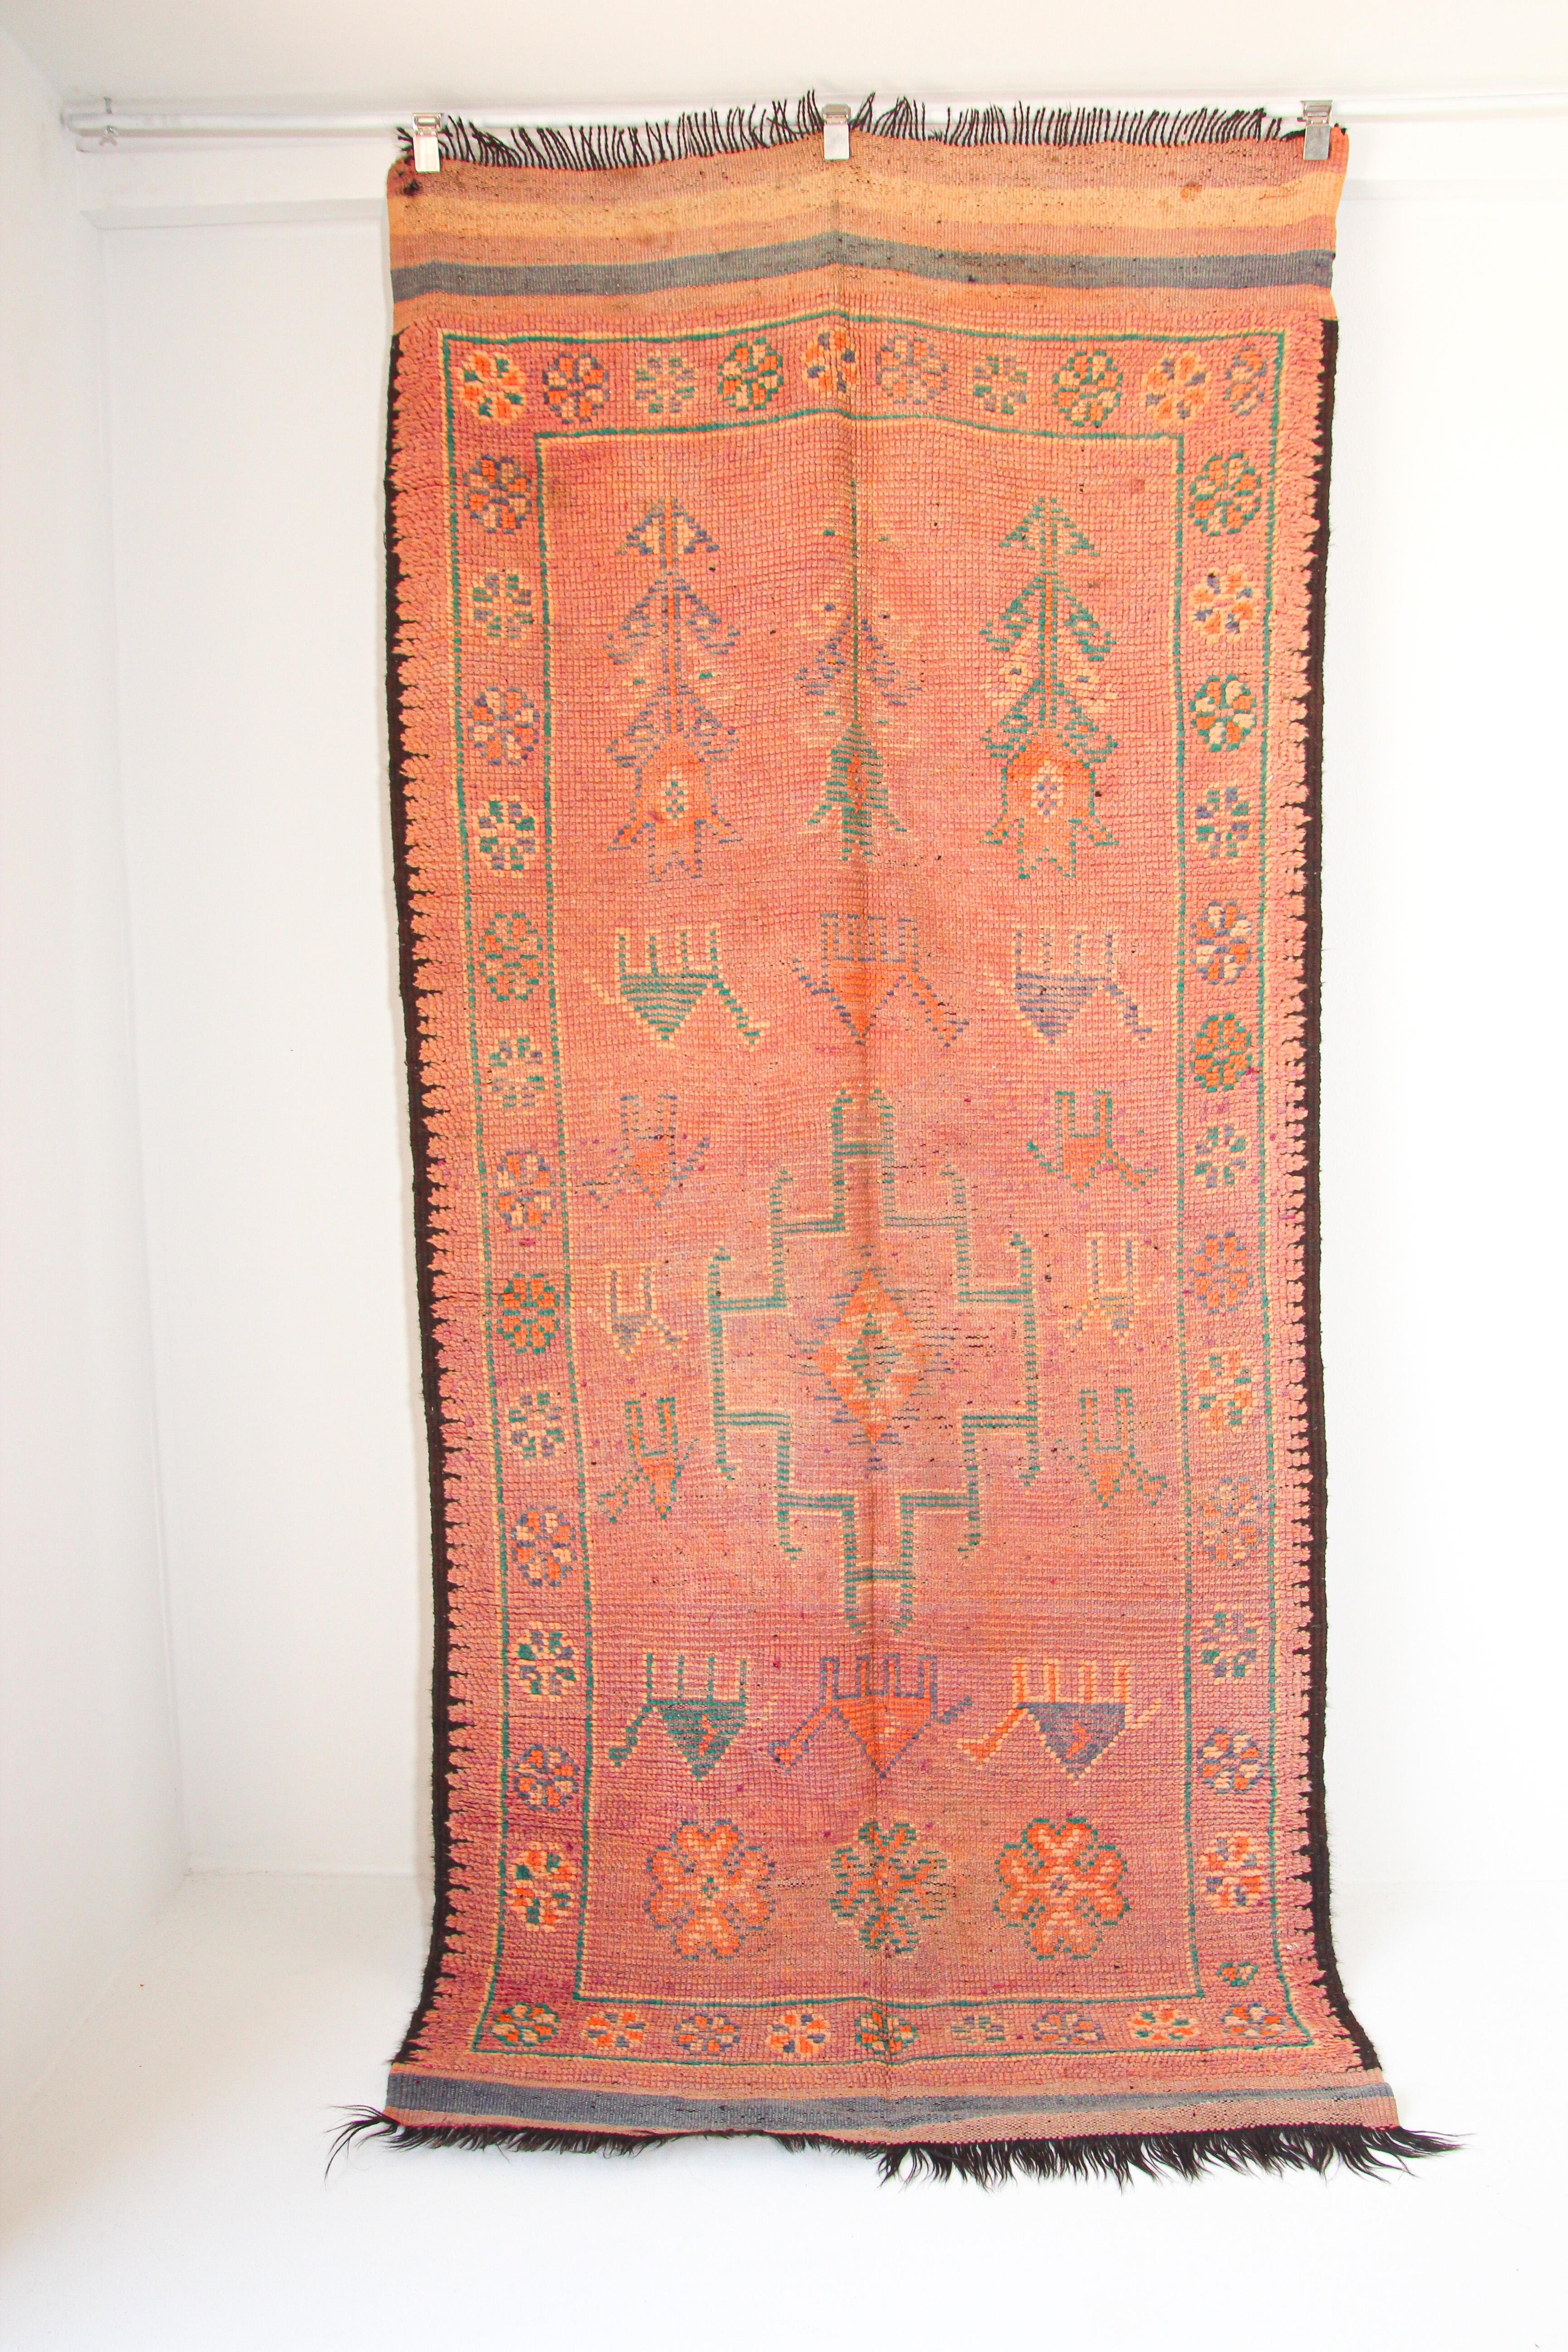 1960s authentic handwoven vintage Moroccan Berber tribal rug, nicely aged and faded orange washed cors.Handwoven by The Berber tribes in Morocco with traditional geometric tribal designs.South of Marrakech low pile rug runner.Great to add accent to